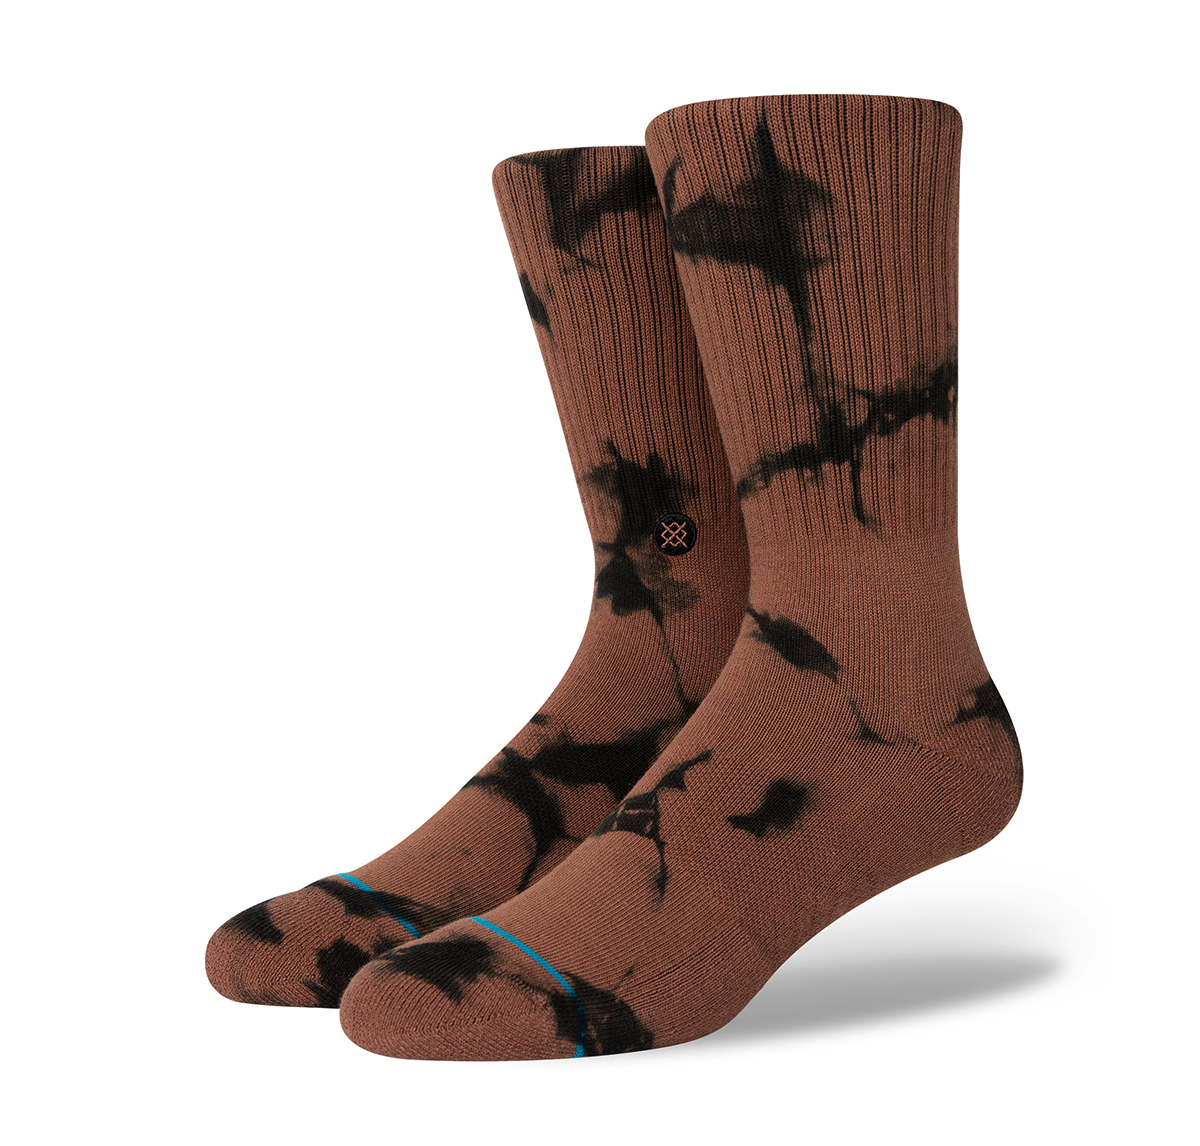 Stance Dyed - Infiknit - Brown side